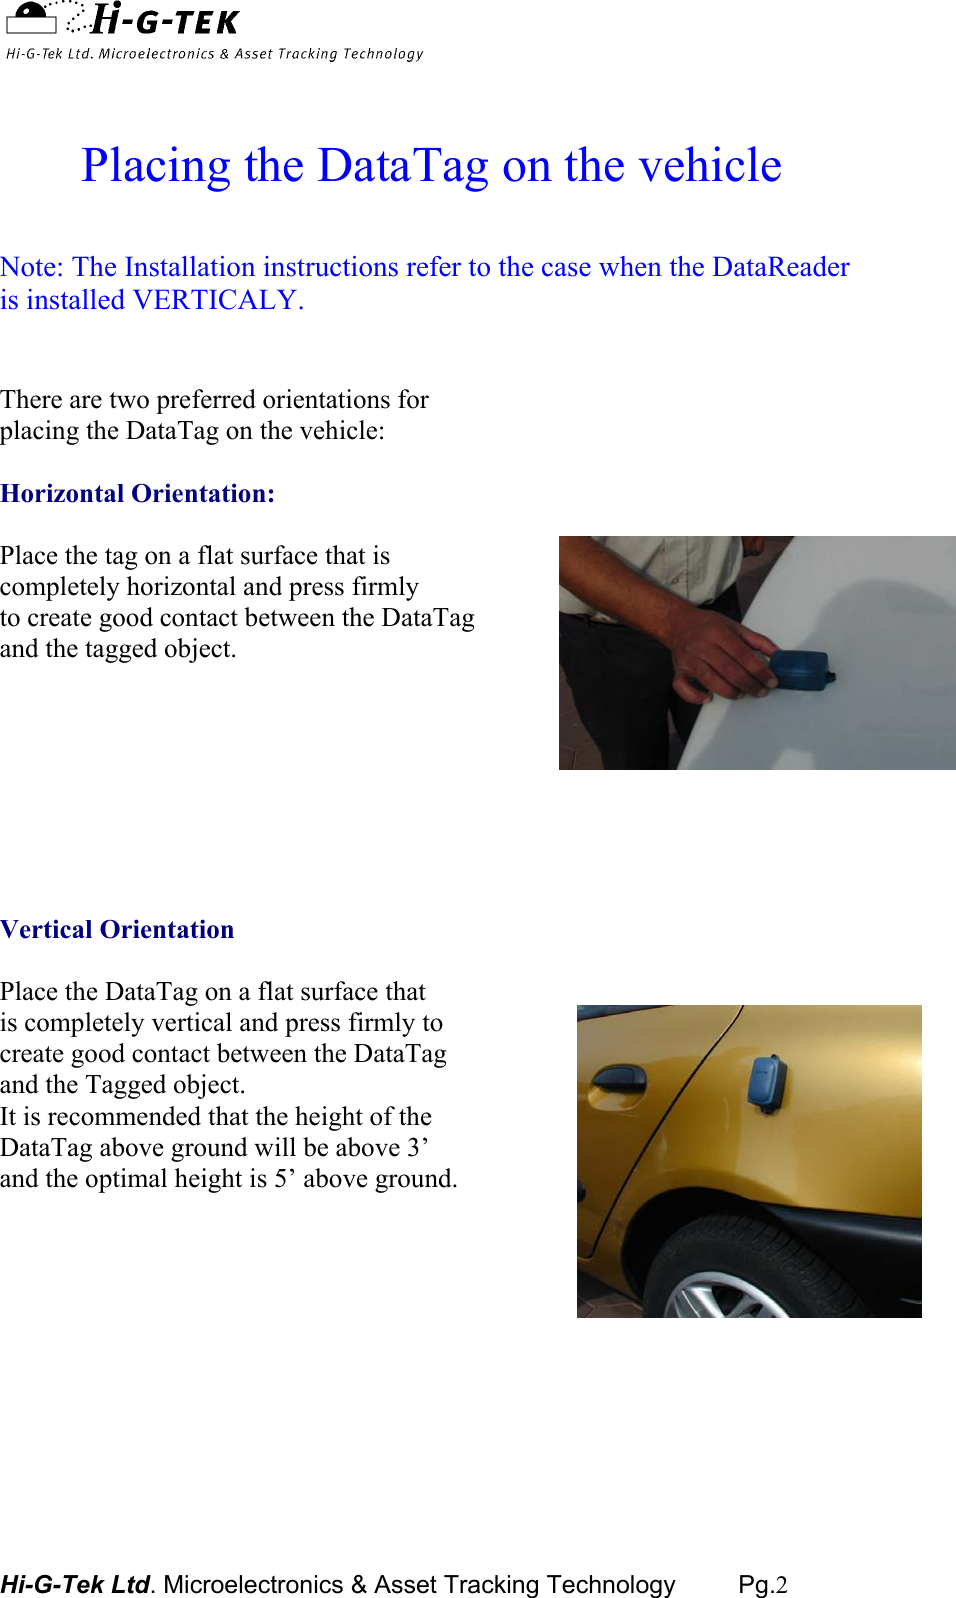  Hi-G-Tek Ltd. Microelectronics &amp; Asset Tracking Technology         Pg.2    Placing the DataTag on the vehicle  Note: The Installation instructions refer to the case when the DataReader is installed VERTICALY.   There are two preferred orientations for placing the DataTag on the vehicle:  Horizontal Orientation:   Place the tag on a flat surface that is  completely horizontal and press firmly  to create good contact between the DataTag  and the tagged object.         Vertical Orientation  Place the DataTag on a flat surface that is completely vertical and press firmly to create good contact between the DataTag and the Tagged object. It is recommended that the height of the DataTag above ground will be above 3’ and the optimal height is 5’ above ground.        